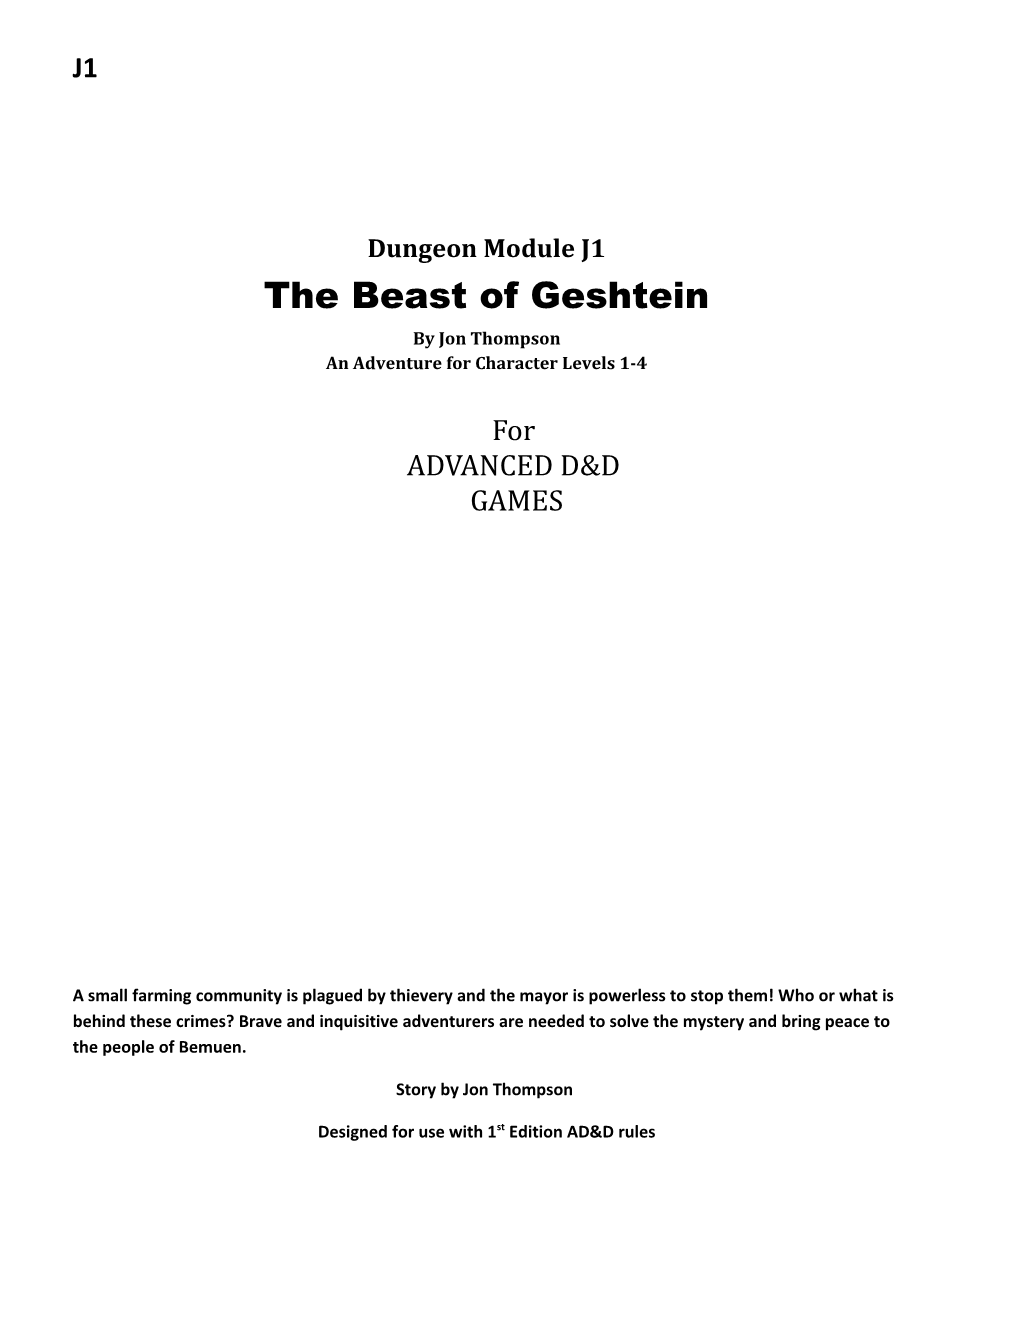 The Beast of Geshtein by Jon Thompson an Adventure for Character Levels 1-4